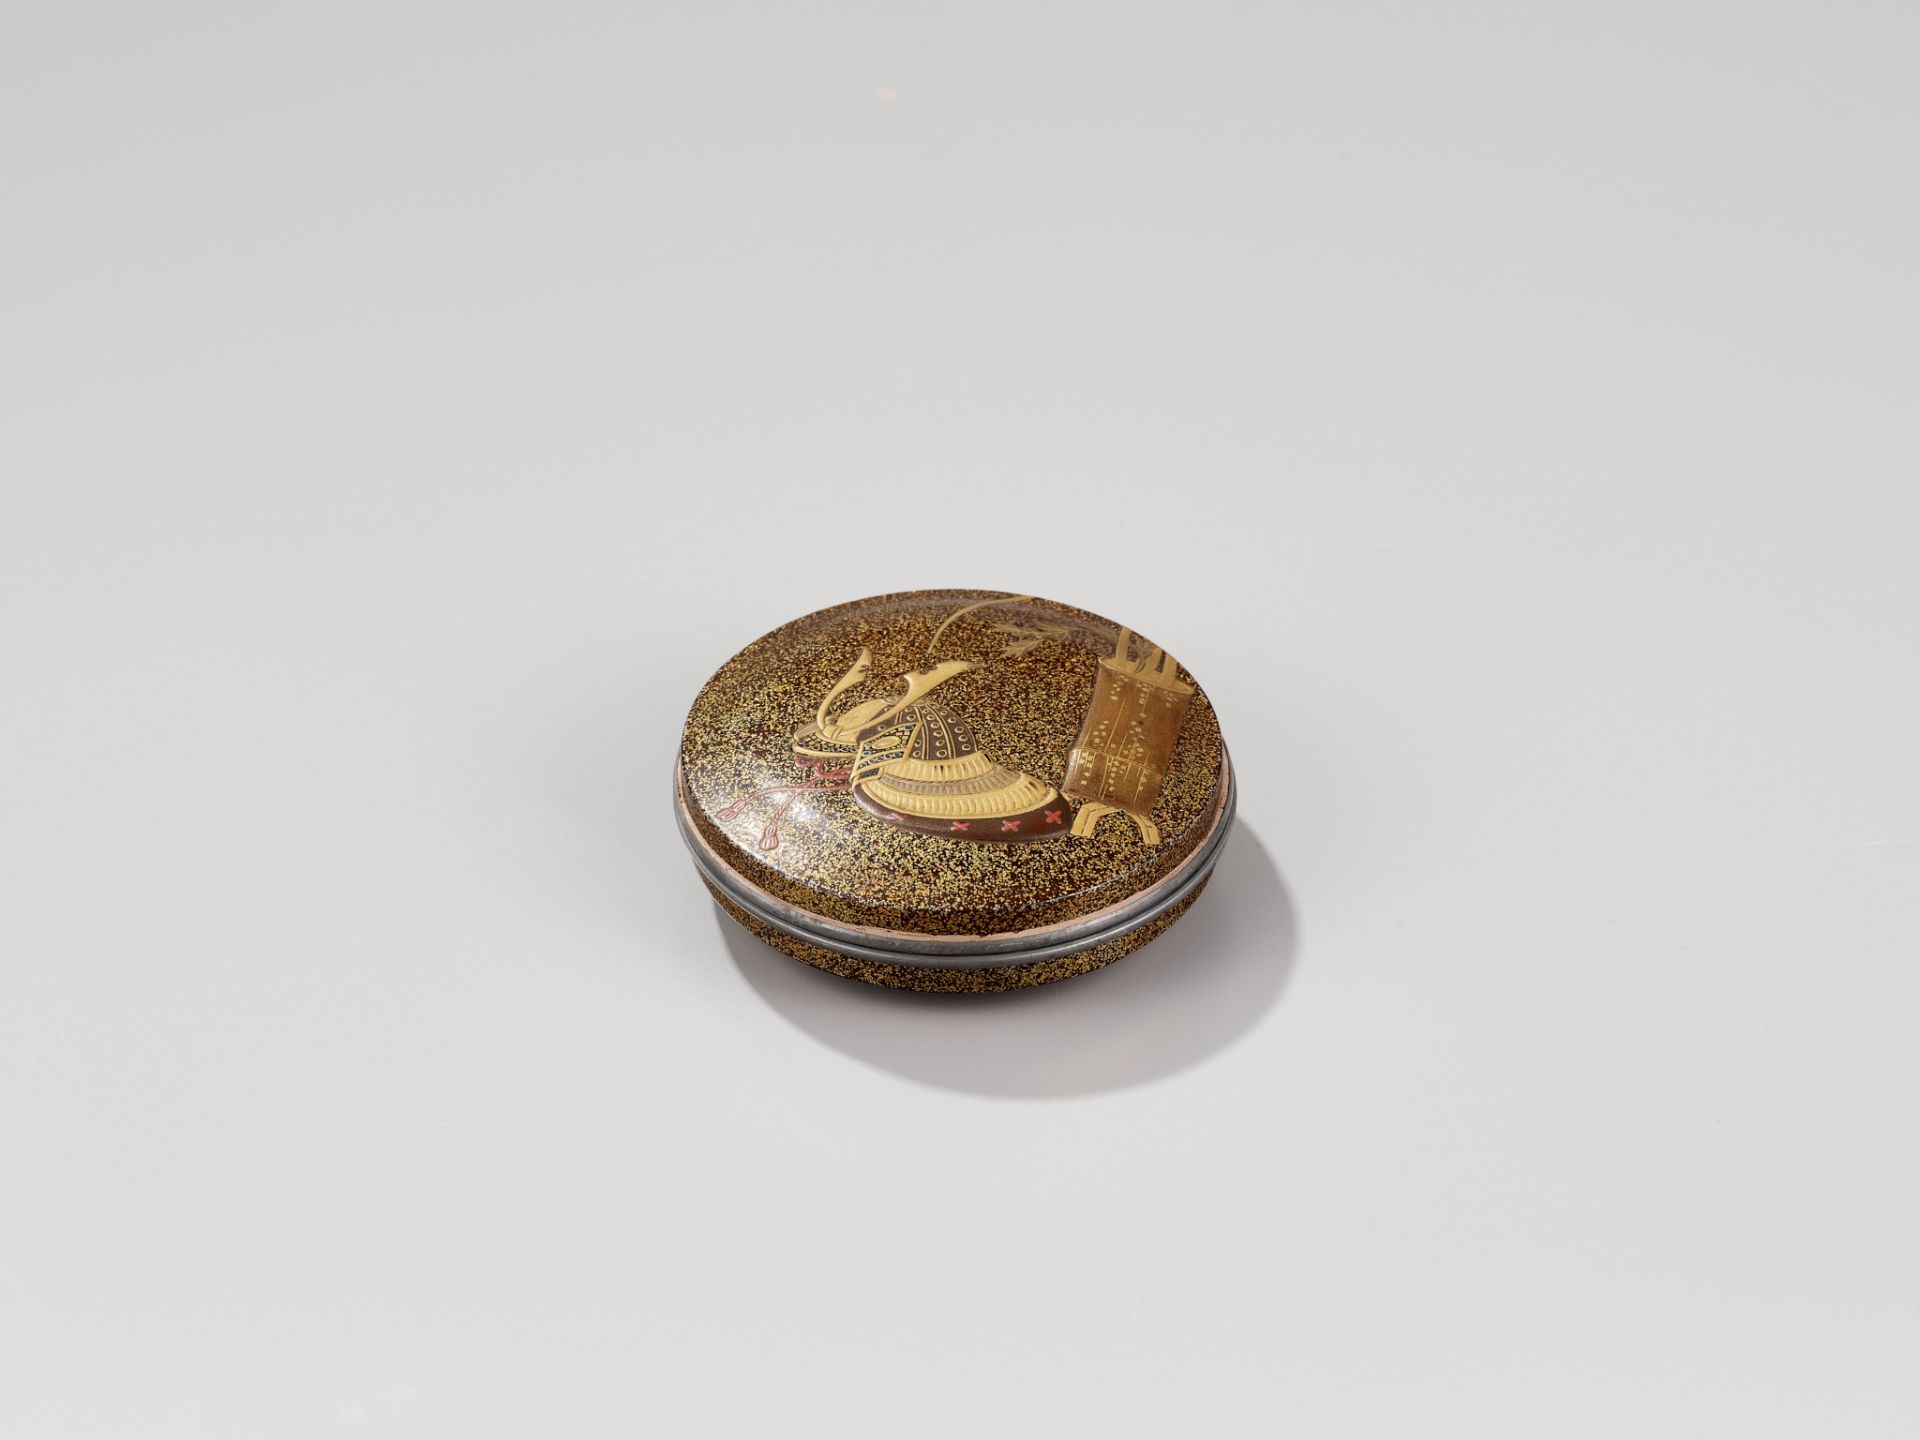 A FINE LACQUER KOGO (INCENSE BOX) AND COVER WITH KABUTO AND BAMBOO HANAKAGO - Image 4 of 7